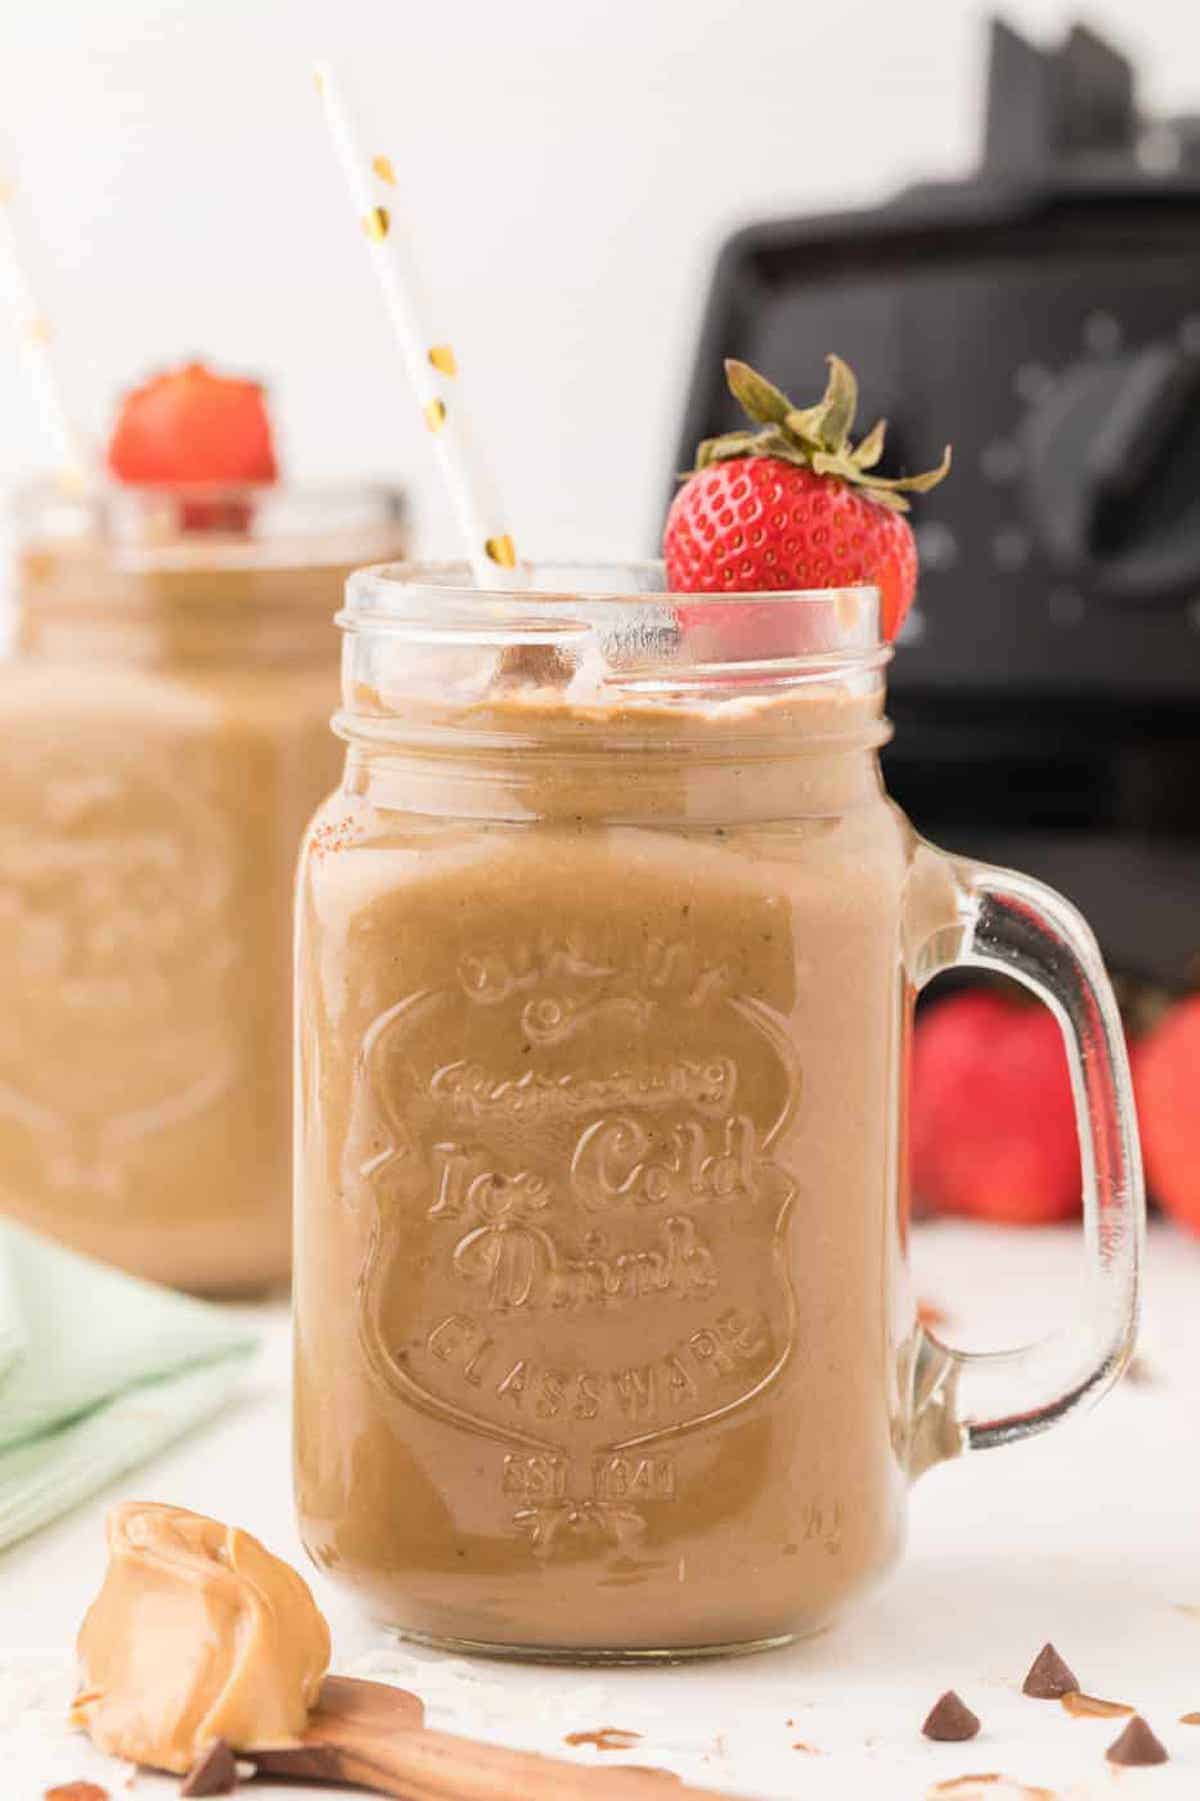 Two mugs of chocolate smoothies.